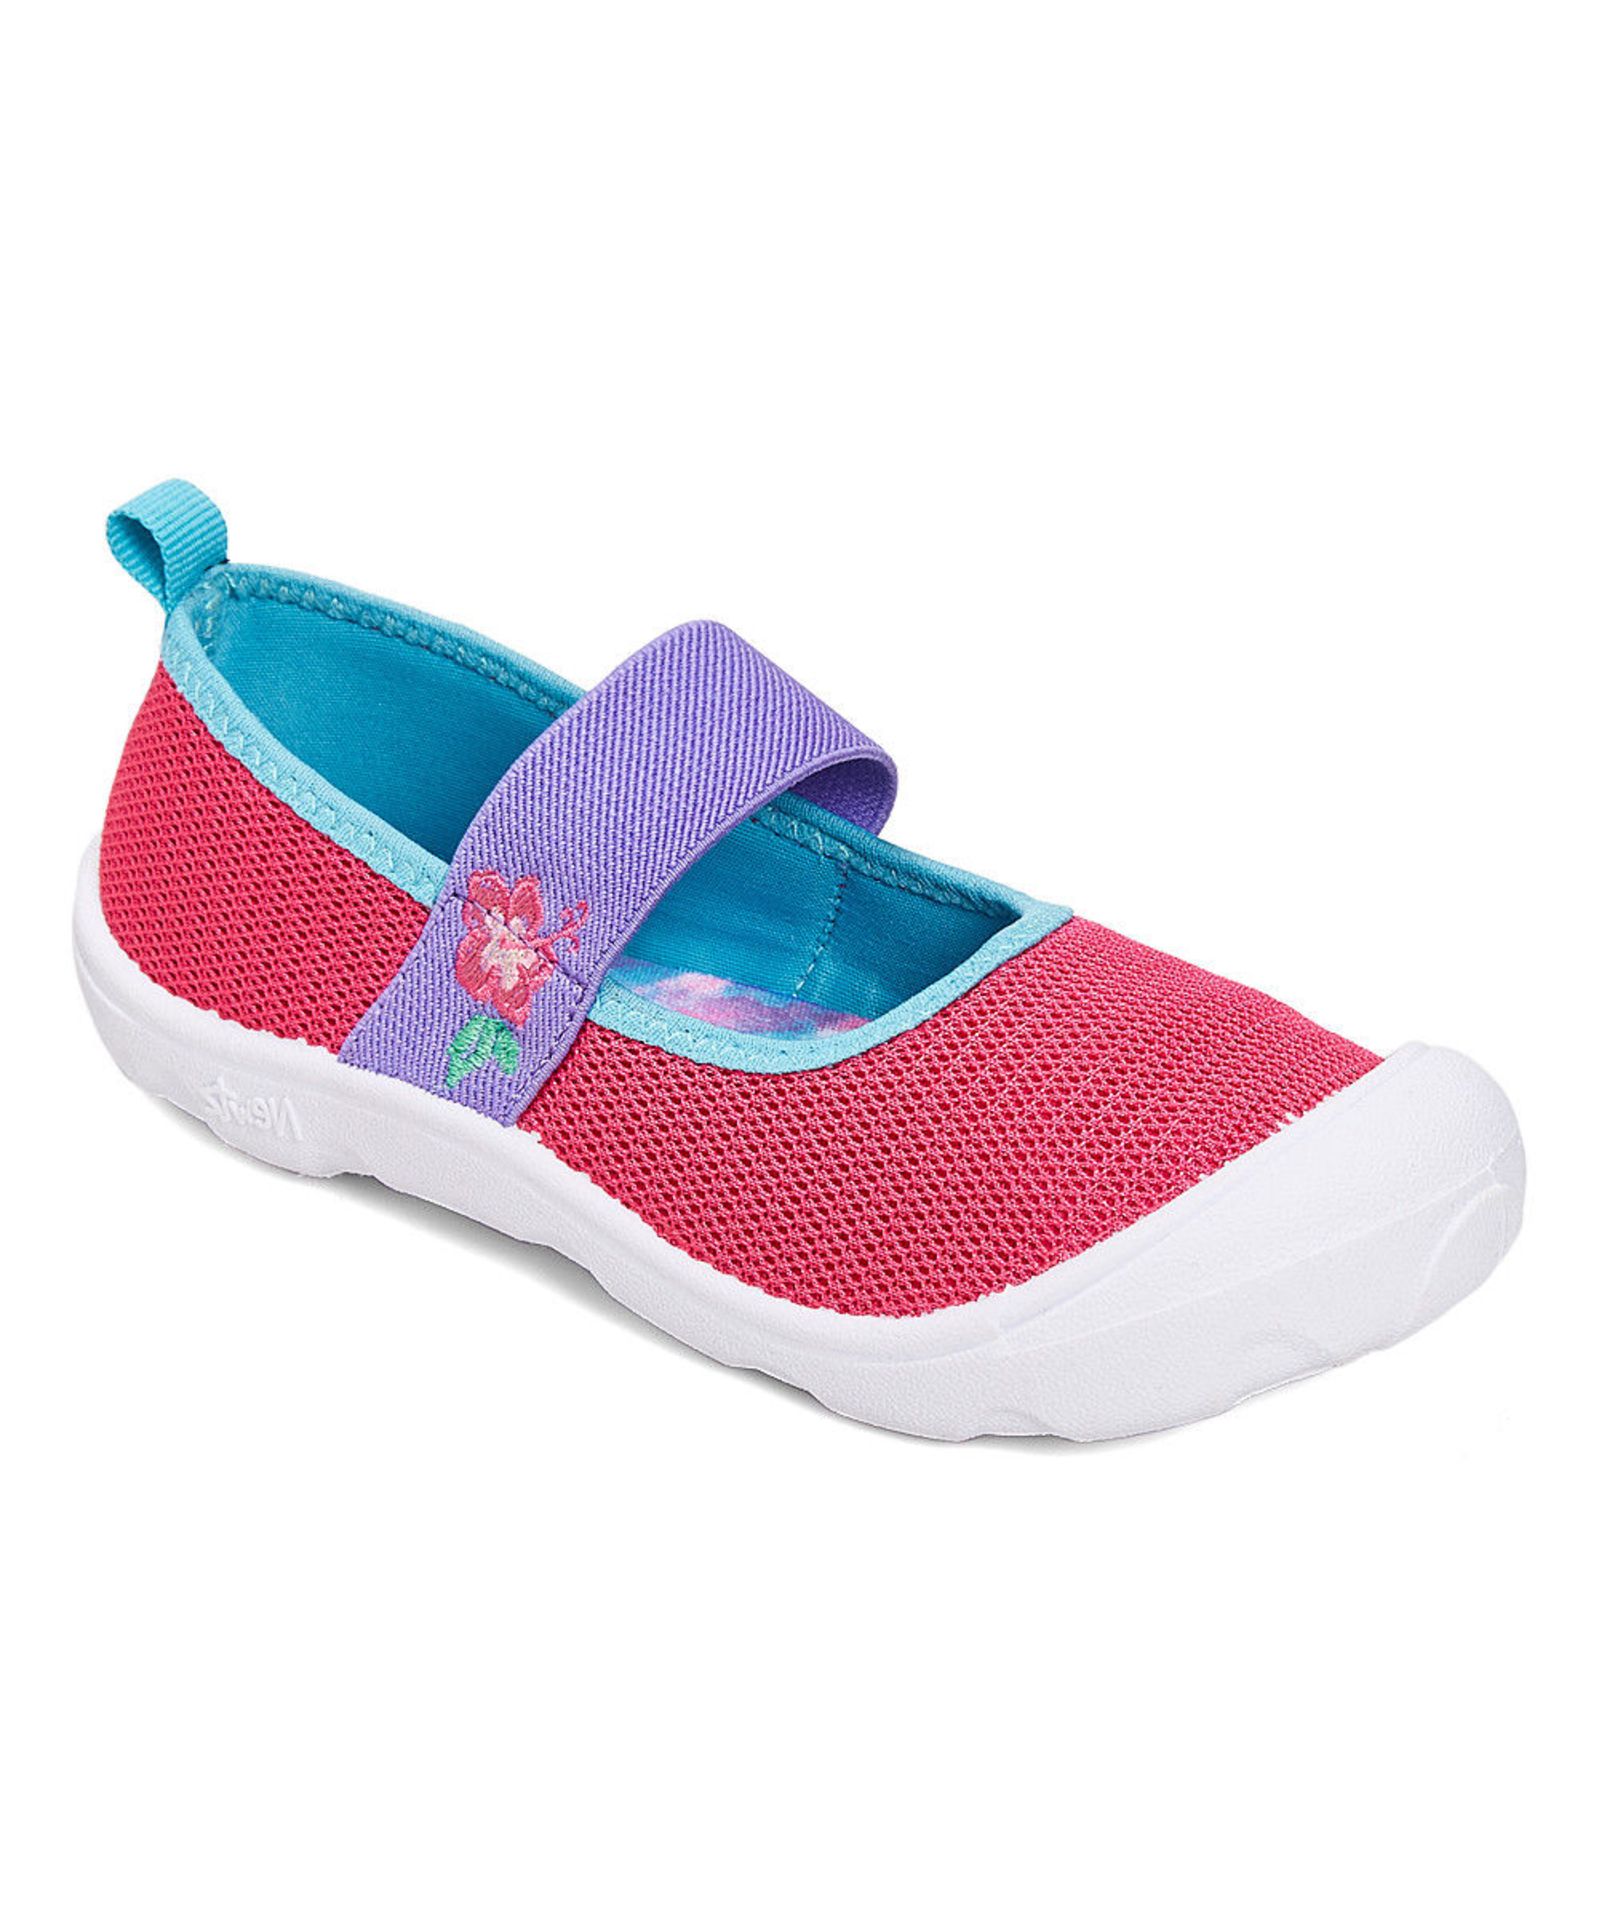 Newtz Pink & Purple Embroidered Water Shoe (Uk Size:10-11/Us Size:11-12) (New Without Box) [Ref: